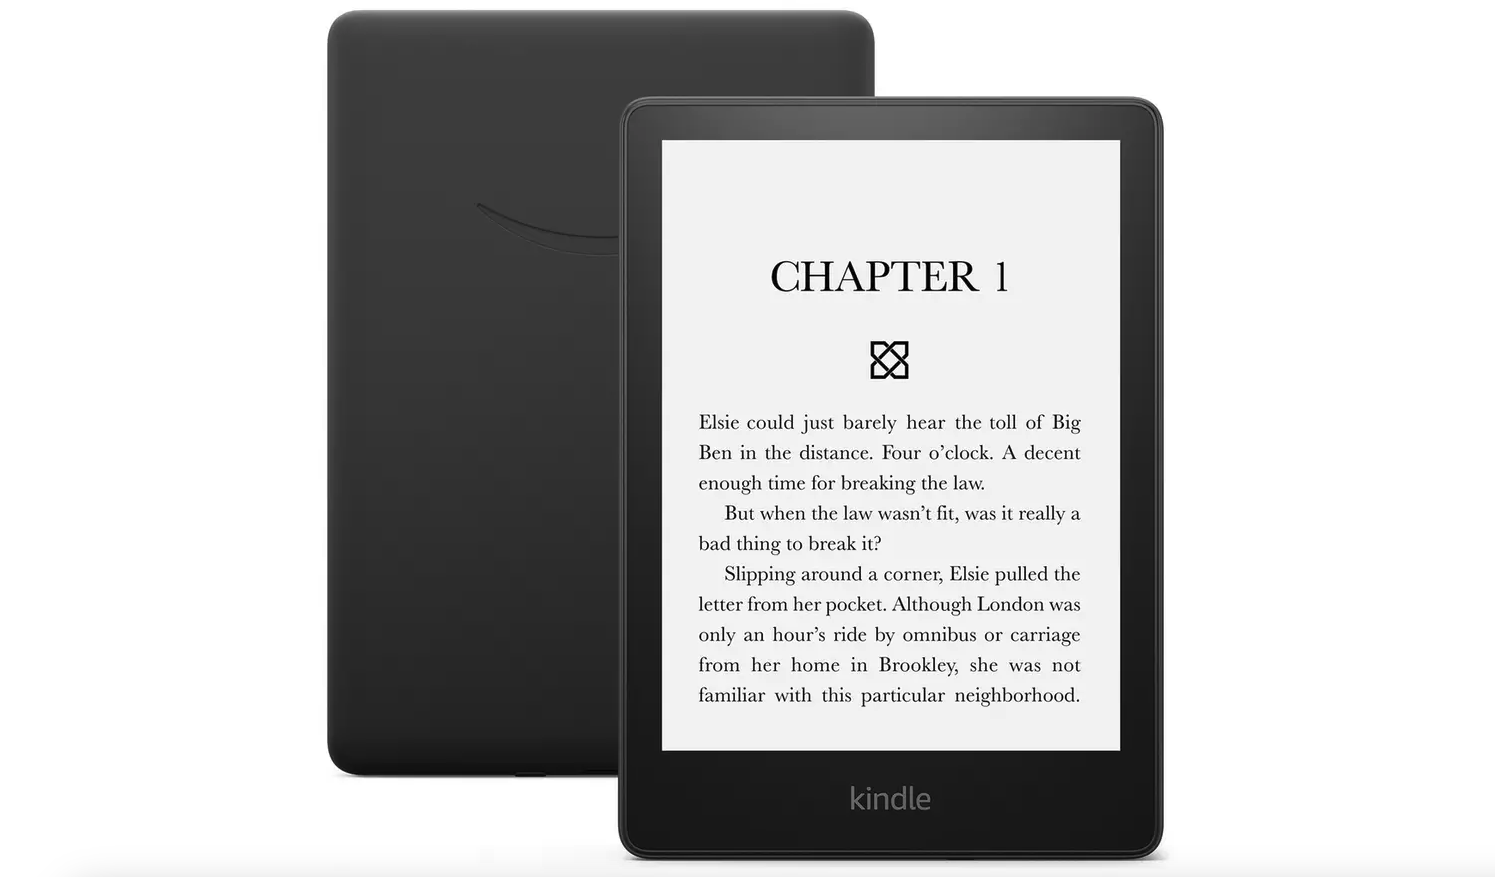 Get an Amazon Kindle Paperwhite 16GB for under £100